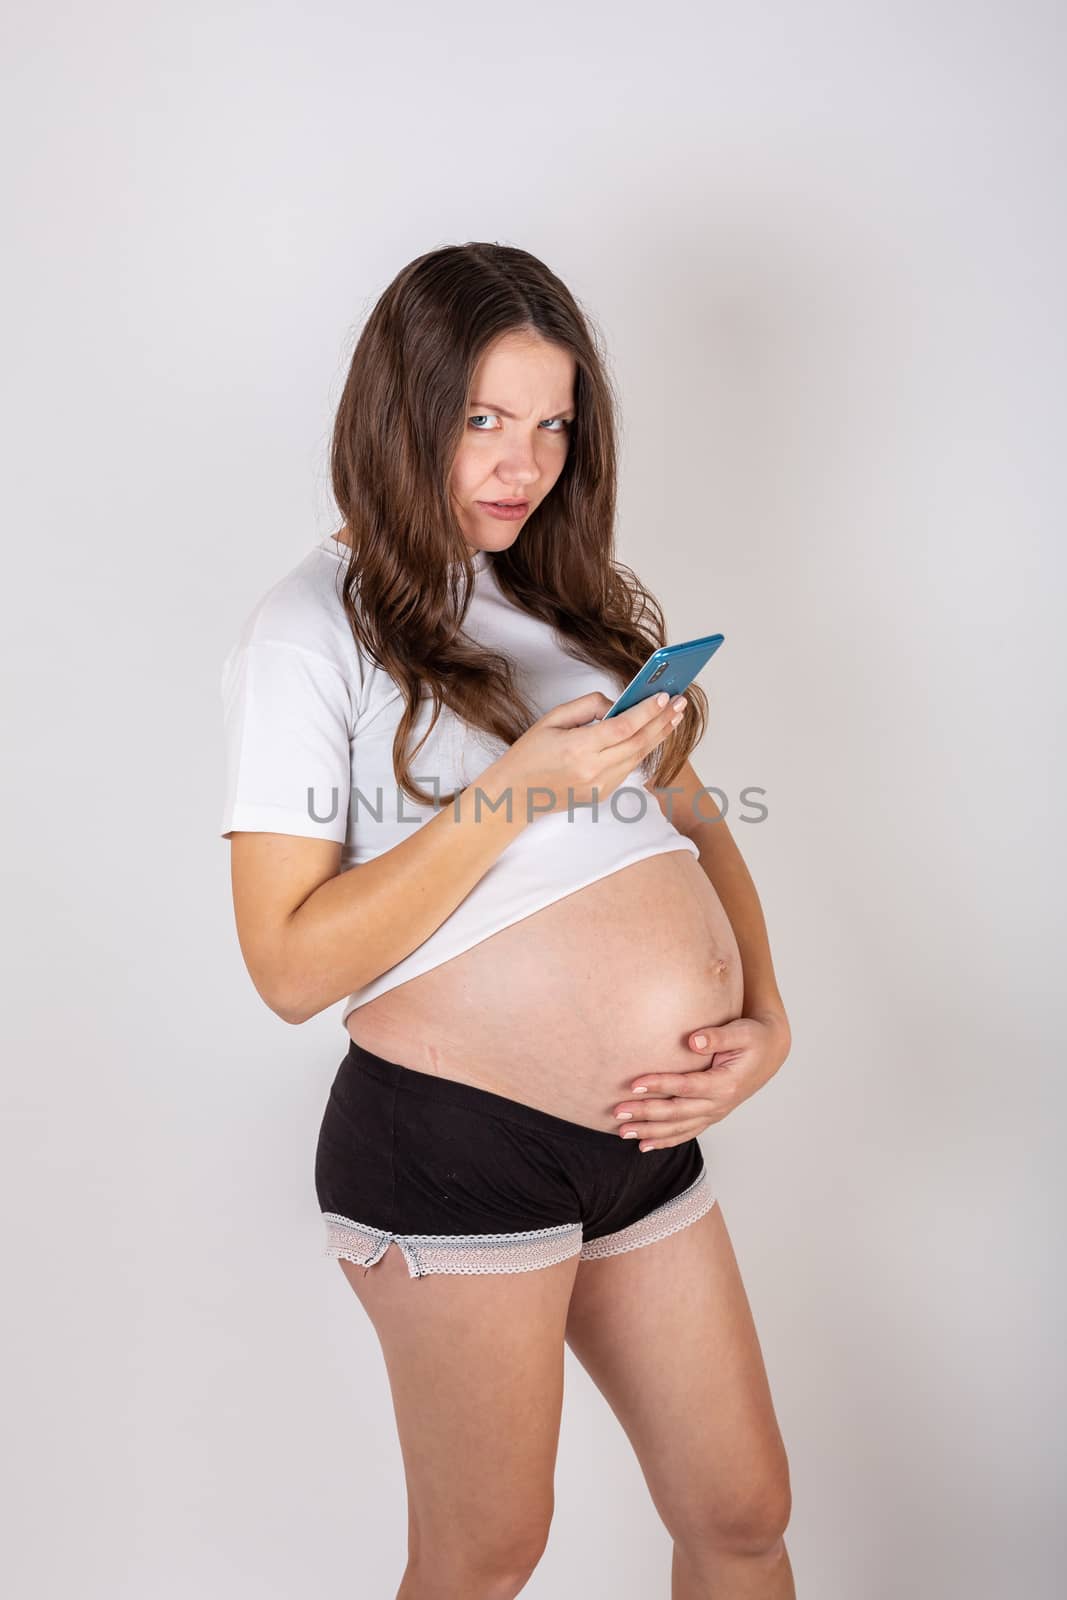 Cute pregnant woman on the phone while lying on a white background by Vassiliy